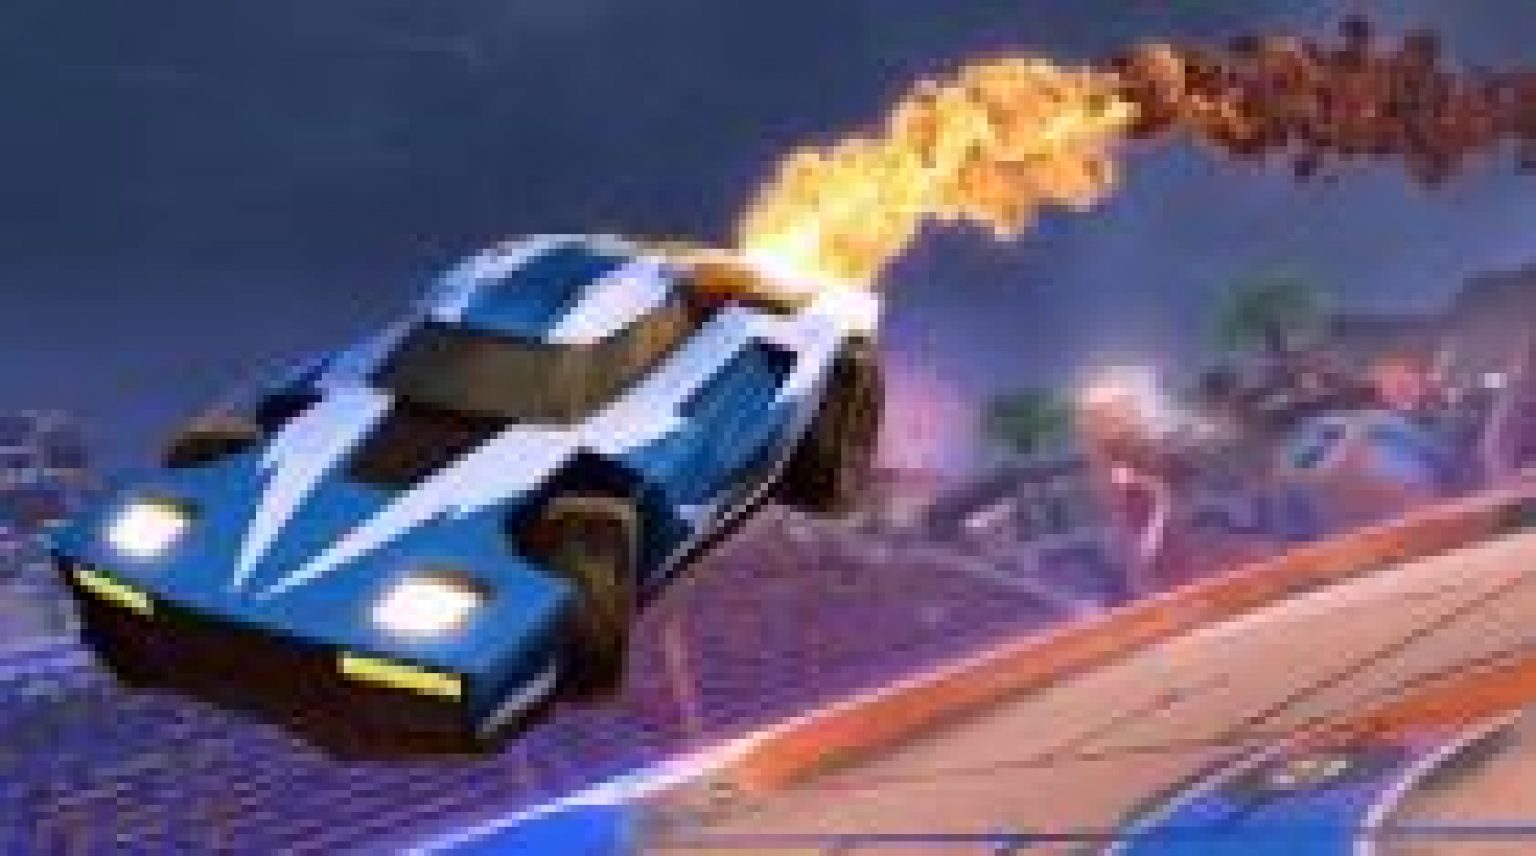 rocket league pc highly compressed